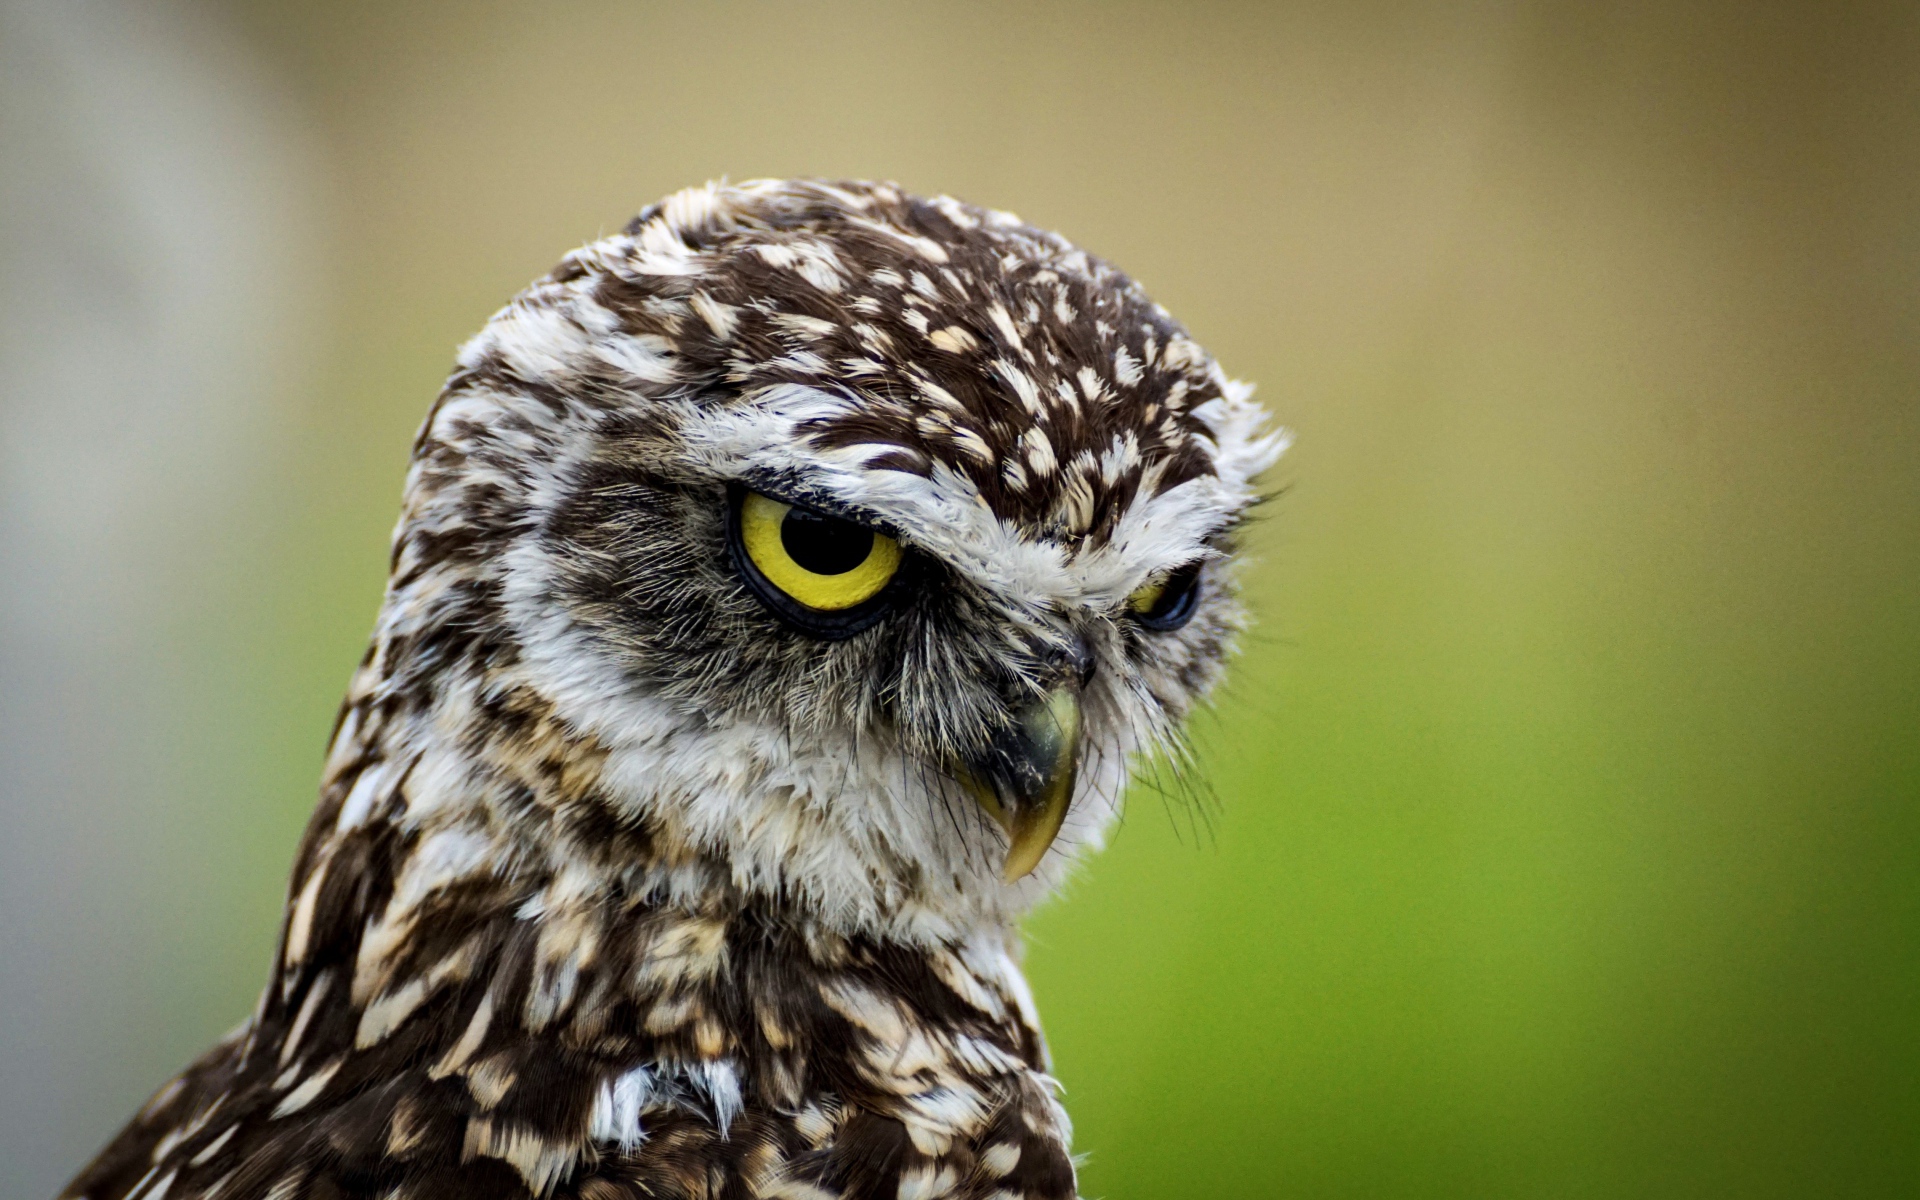 Head of a big owl with yellow eyes close-up